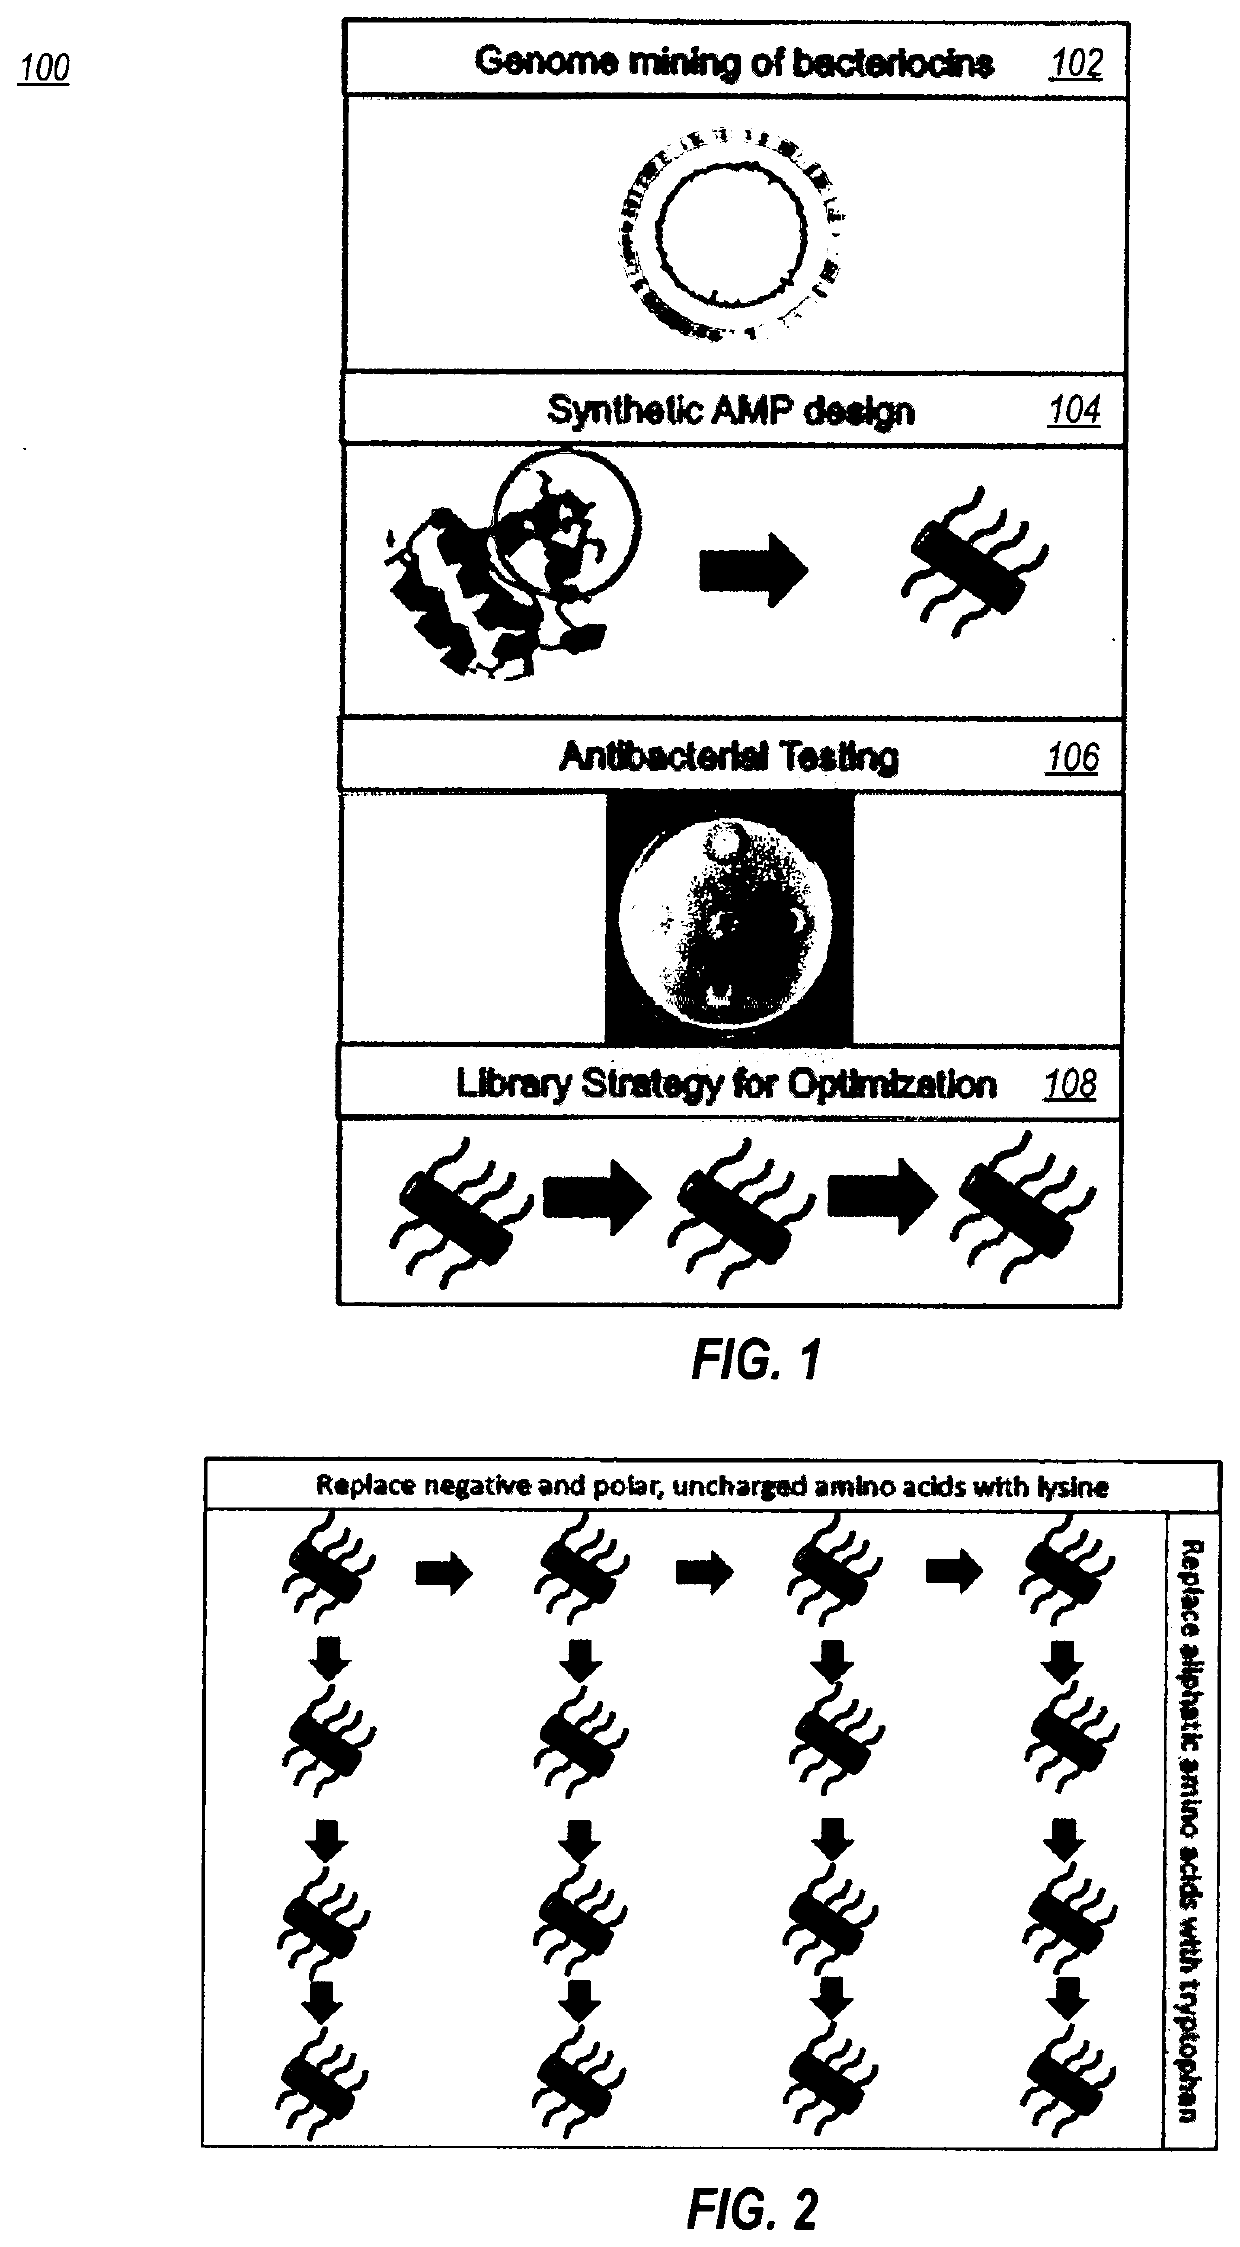 Systems and methods for designing synthetic antimicrobial peptides